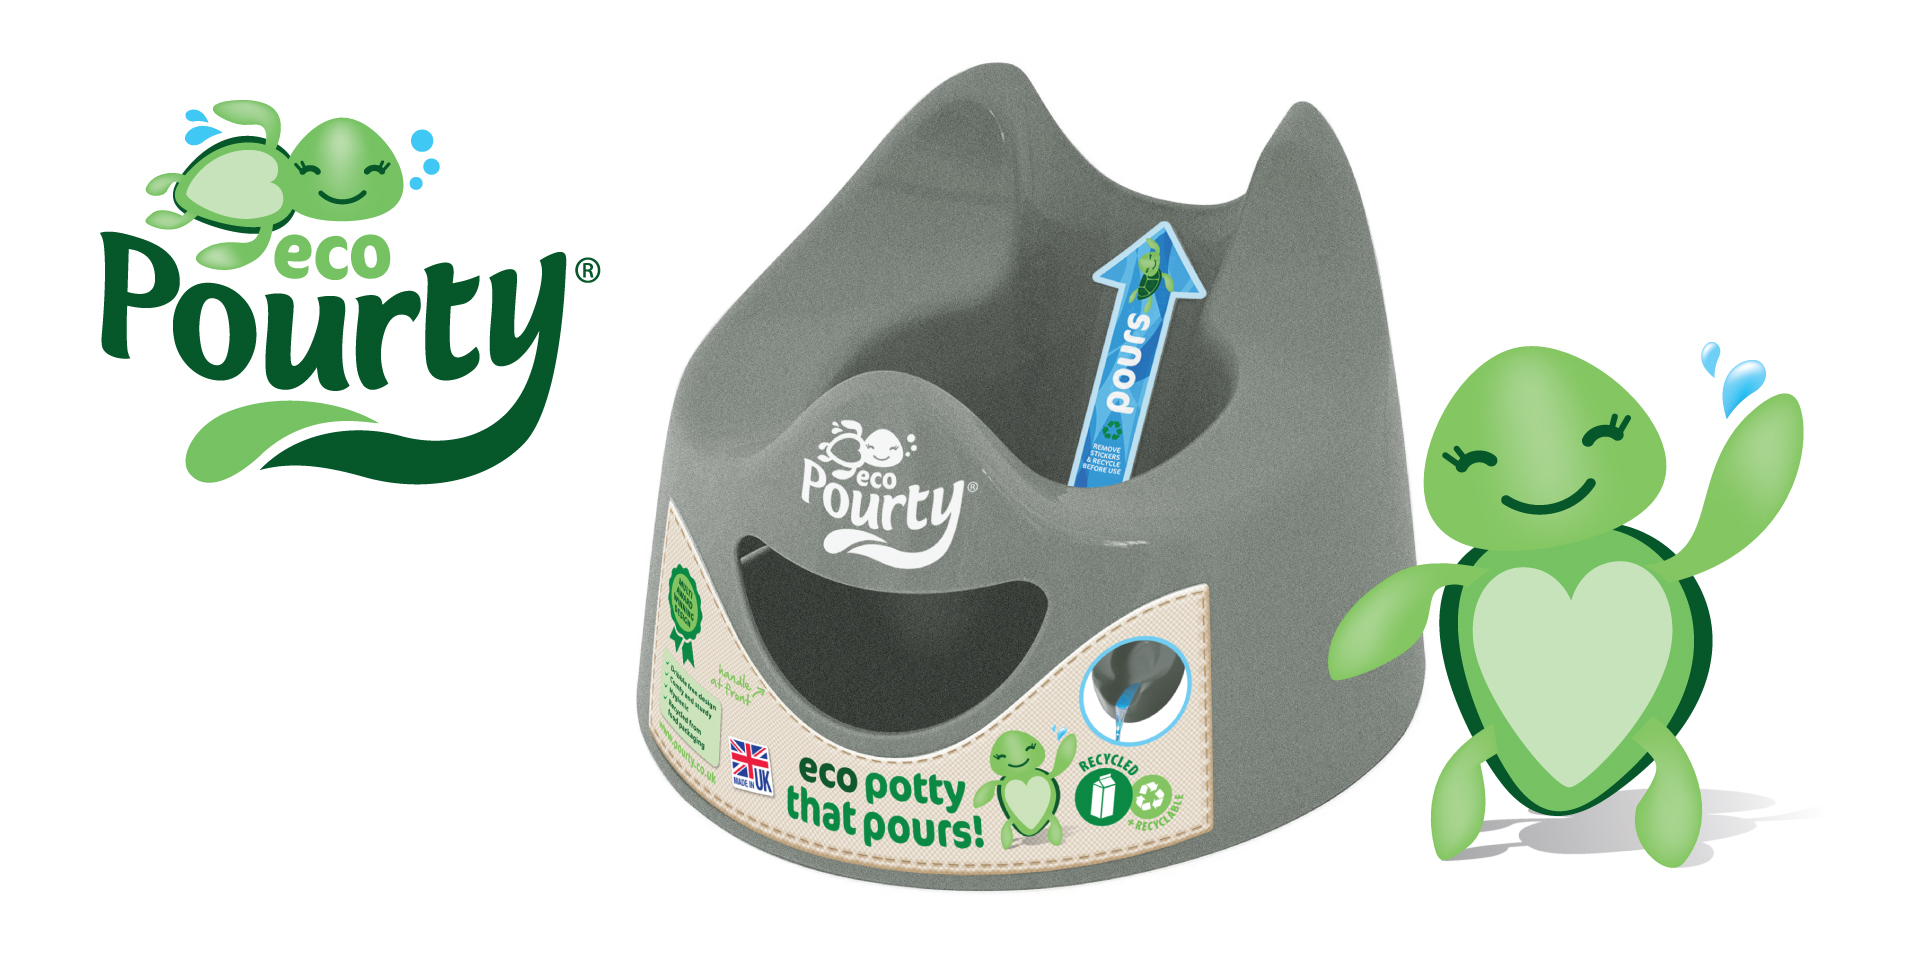 Eco Pourty packaging